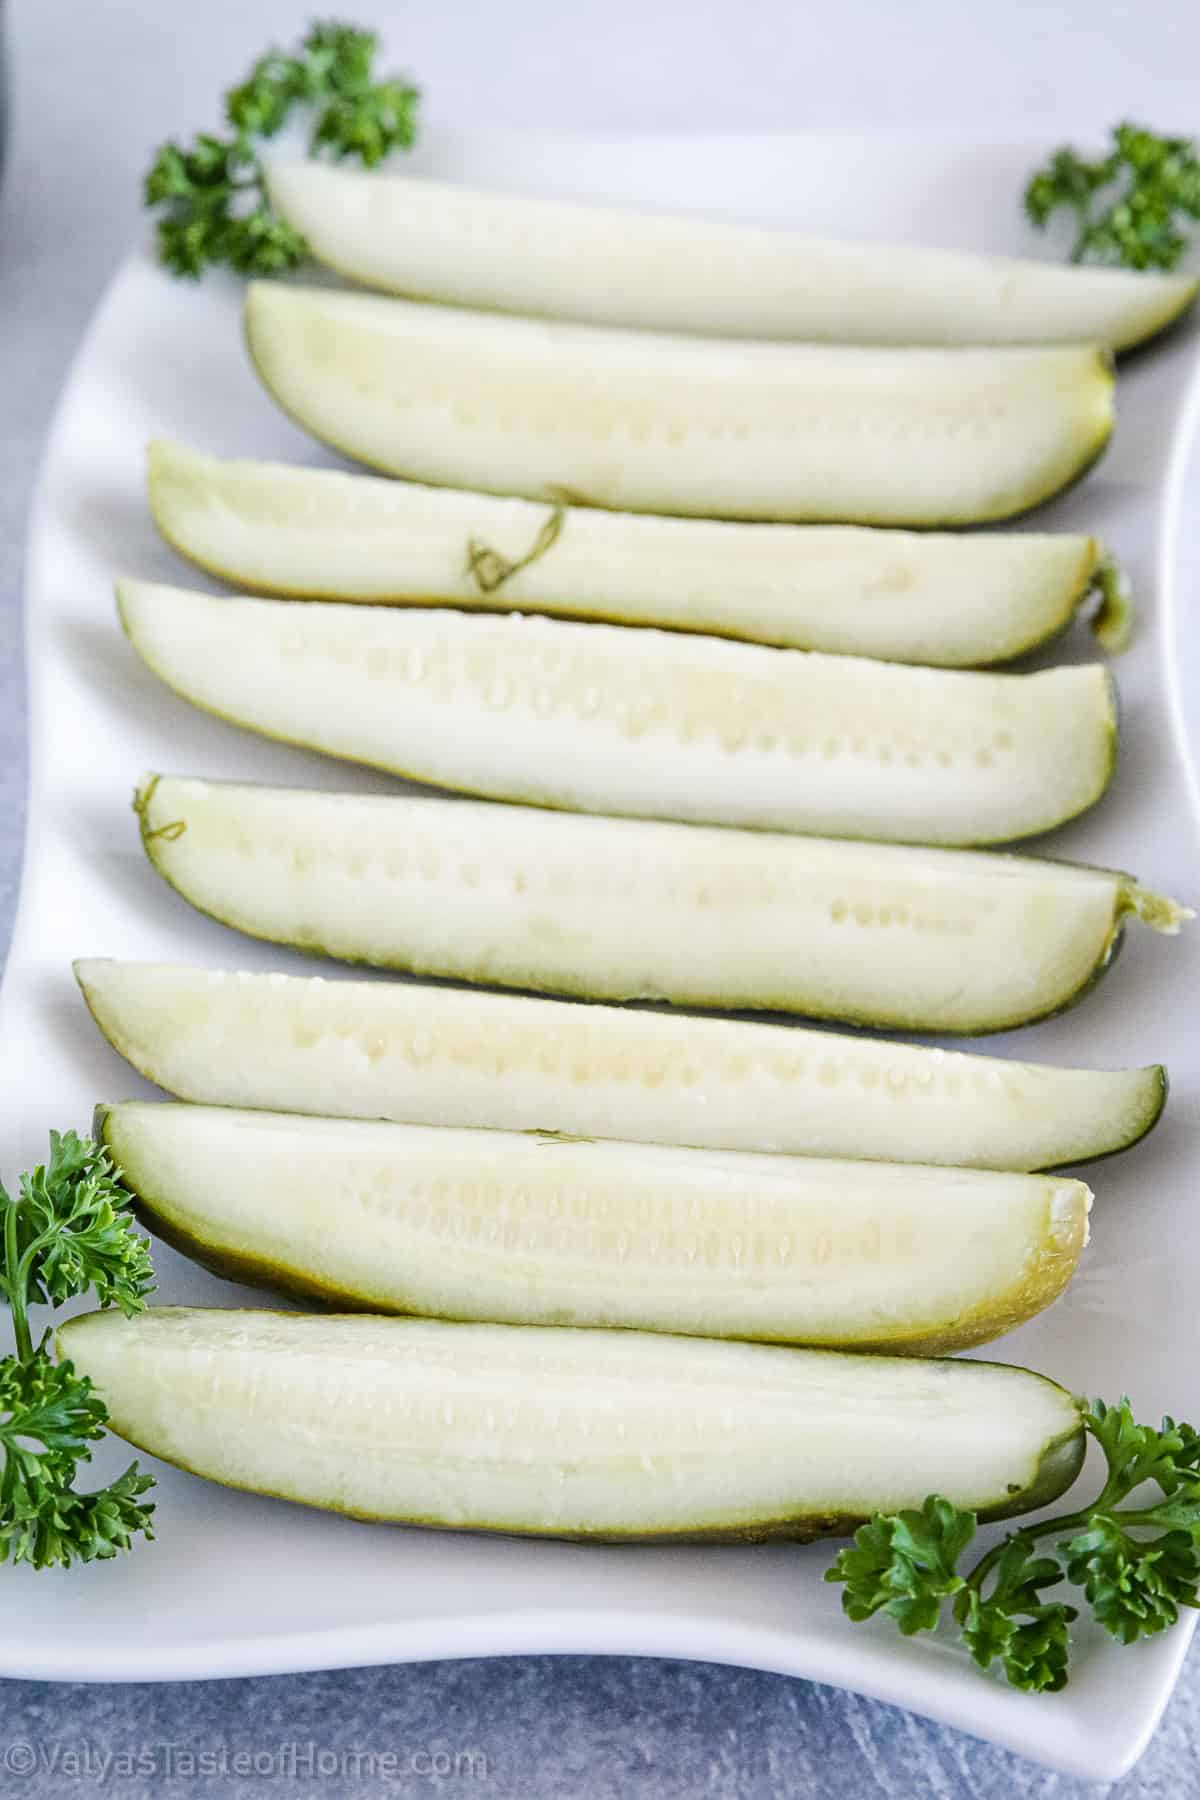 These pickles are easy to make, require no canning equipment, and can be stored in the refrigerator for several weeks.